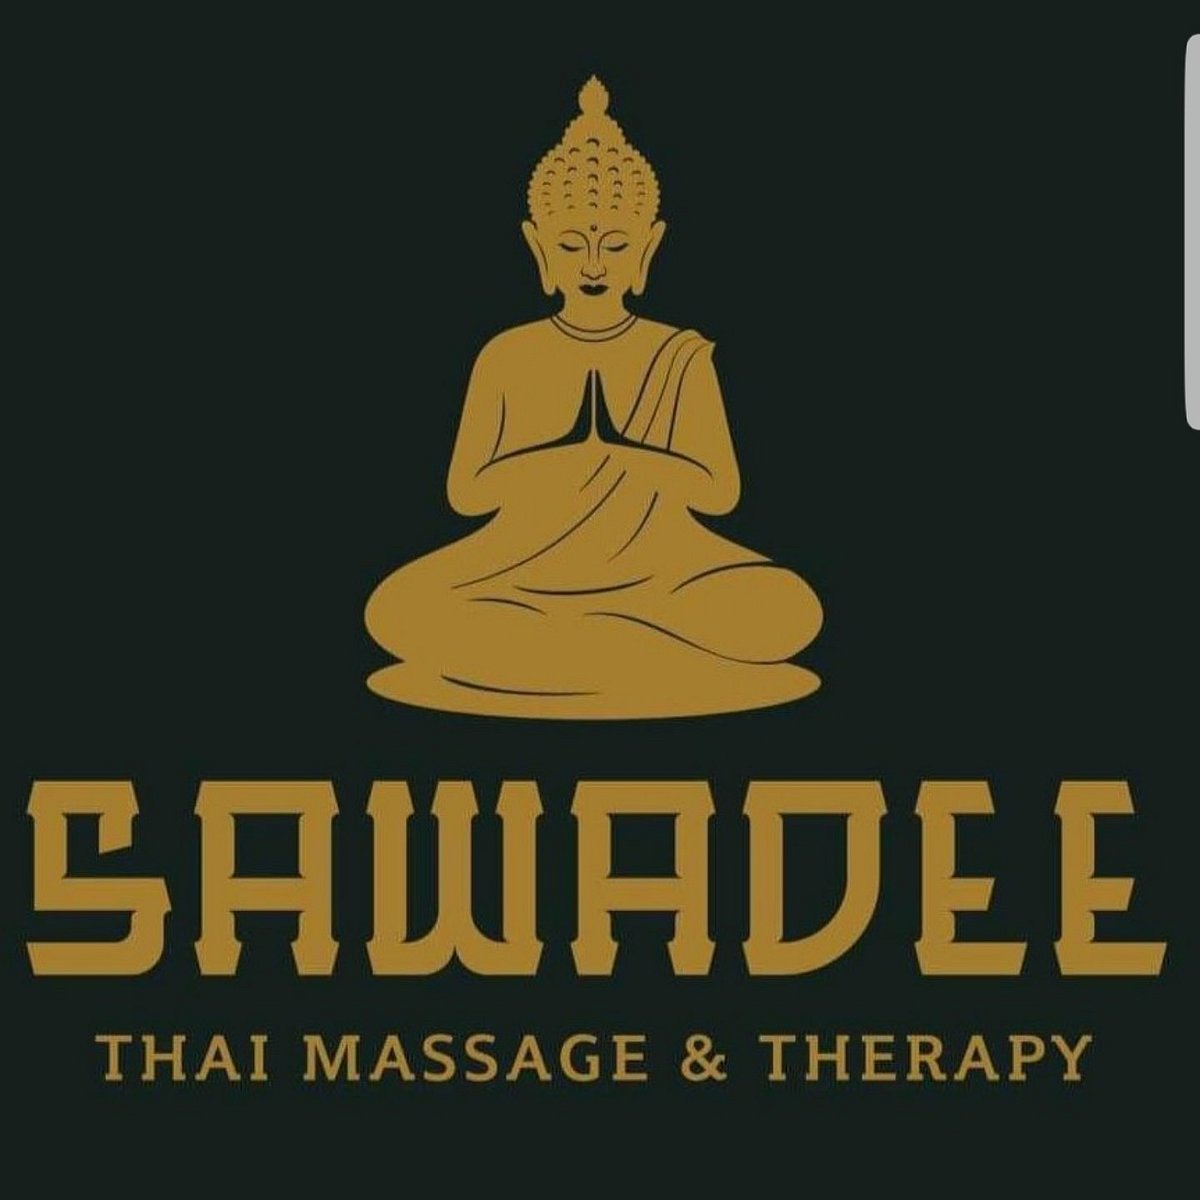 Sawadee Thai Massage Andtherapy Leeds All You Need To Know Before You Go